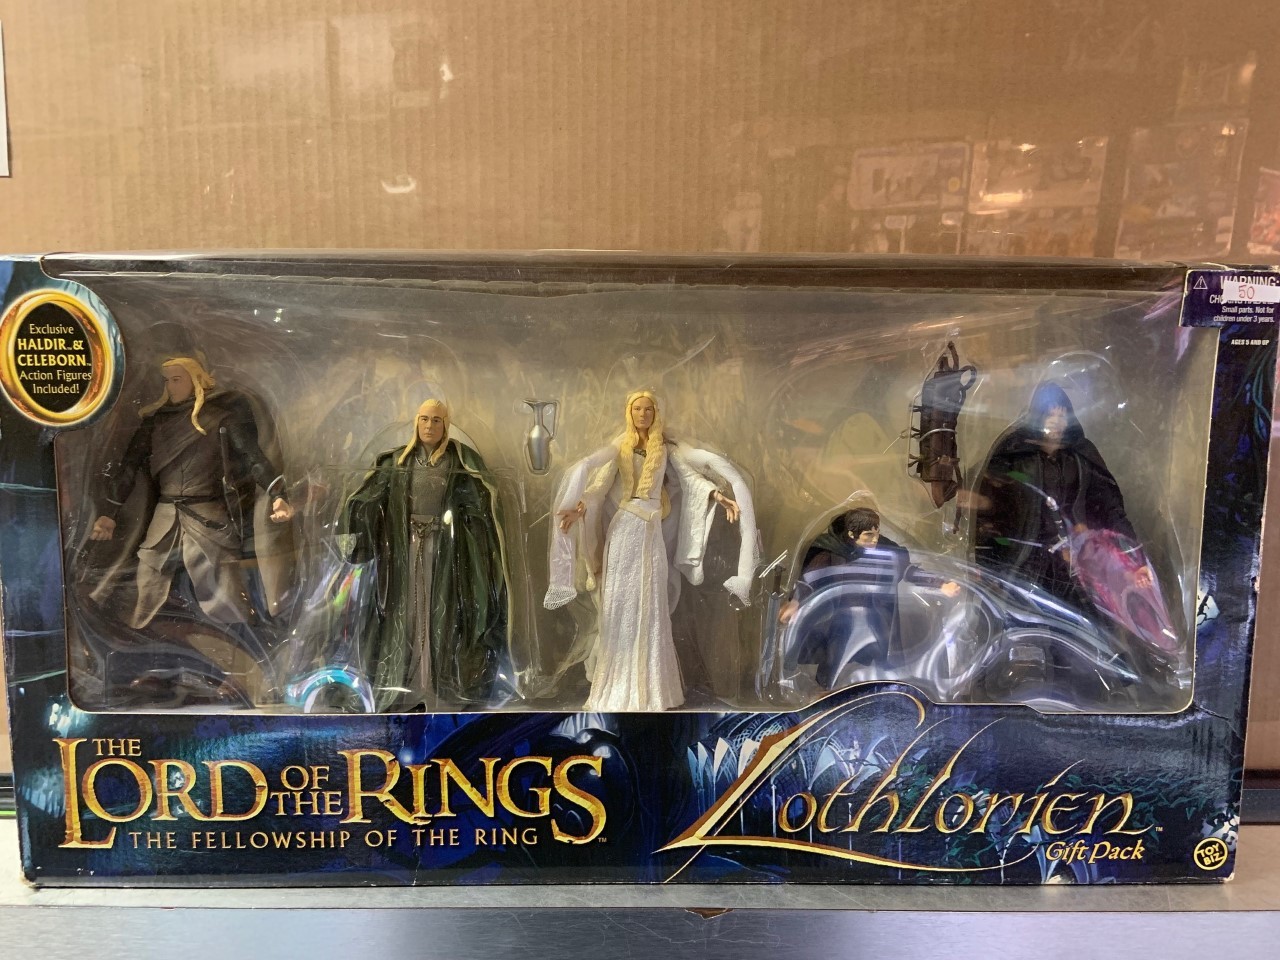 Lord of The Rings: The Fellowship of the Ring Lothlorien Gift Pack